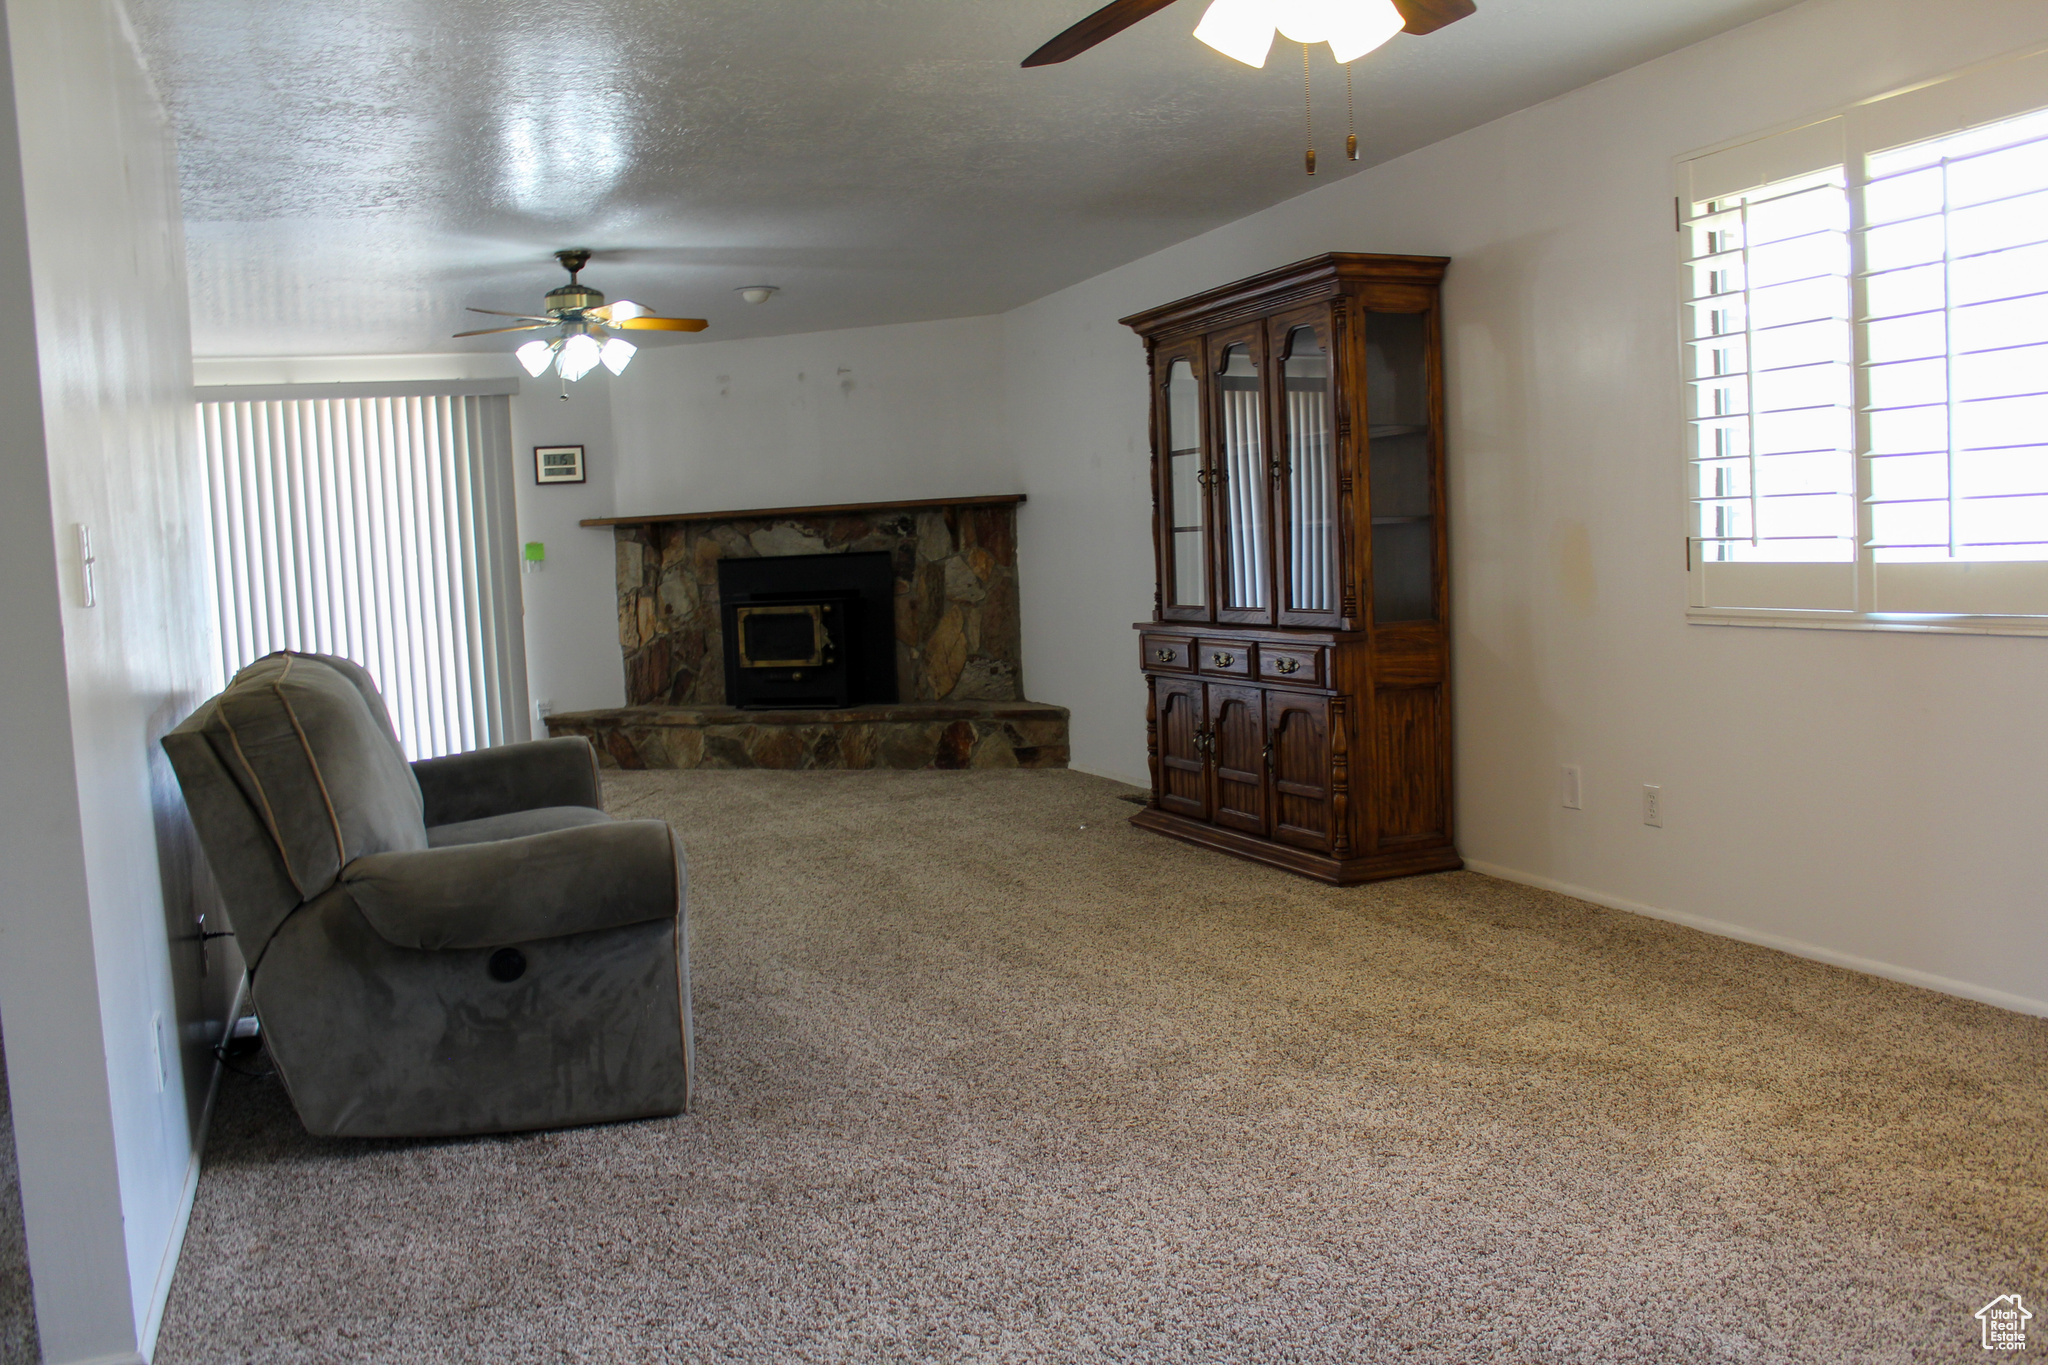 7420 S 1025 E, South Weber, Utah 84405, 3 Bedrooms Bedrooms, 15 Rooms Rooms,1 BathroomBathrooms,Residential,For sale,1025,1986808